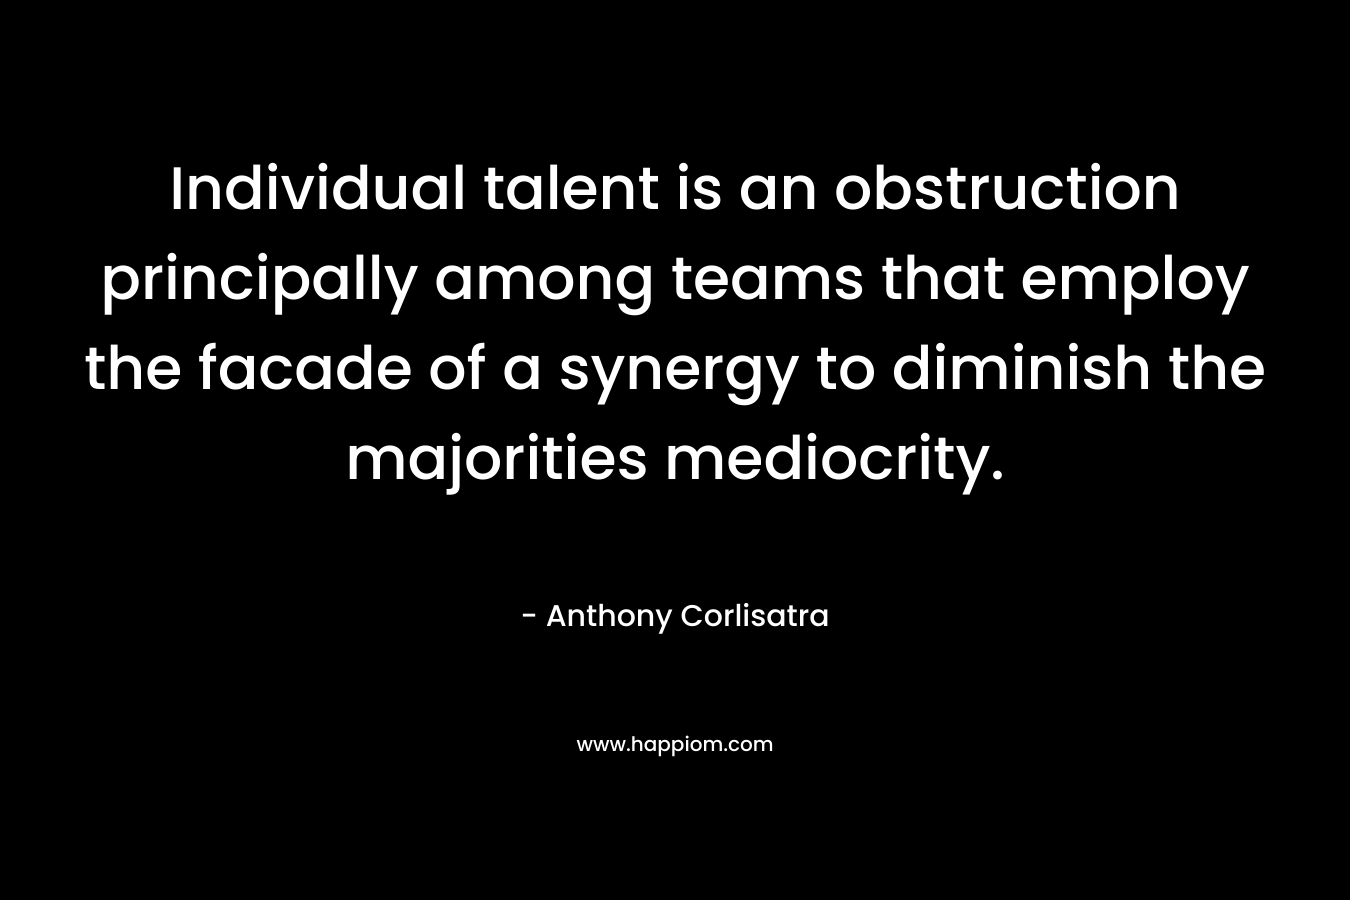 Individual talent is an obstruction principally among teams that employ the facade of a synergy to diminish the majorities mediocrity. – Anthony Corlisatra